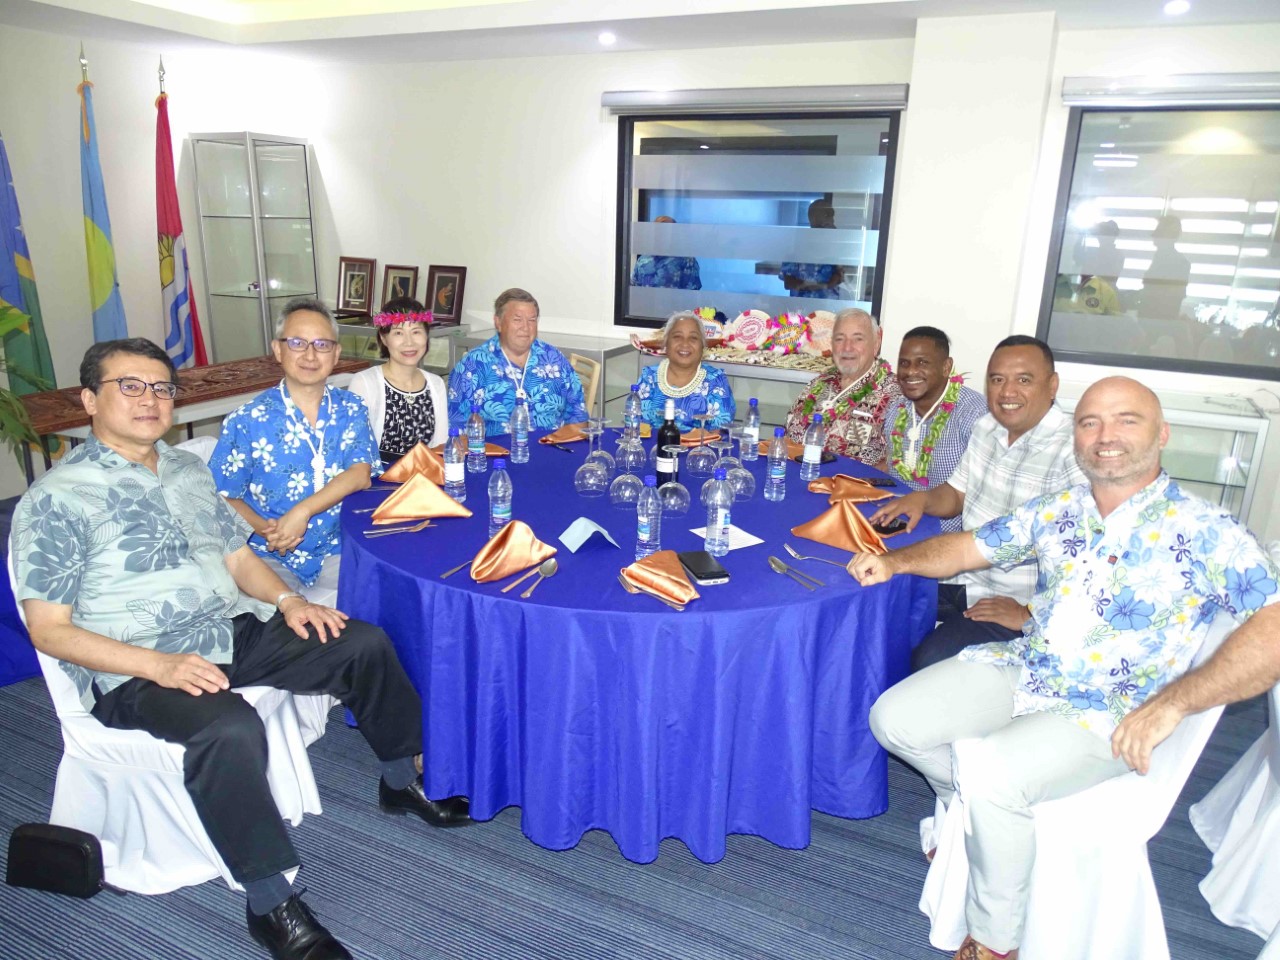 (From left) Japan Ambassador Kazunari Tanaka, Taiwan Ambassador Steve C.C. Hsia and his spouse, Les Clark; Dr. Sangaa Clark, CEO of the PNA Office, and wife of Les; Joseph “Jerry Kramer,” CEO of Pacific International Inc.; US Embassy Chargé Affaires Jeremiah Knight, Fred Nysta, grants manager for the U.S. Department of the Interior at the U.S. Embassy; Fred Nysta, and Australian Ambassador Brek Batley. 